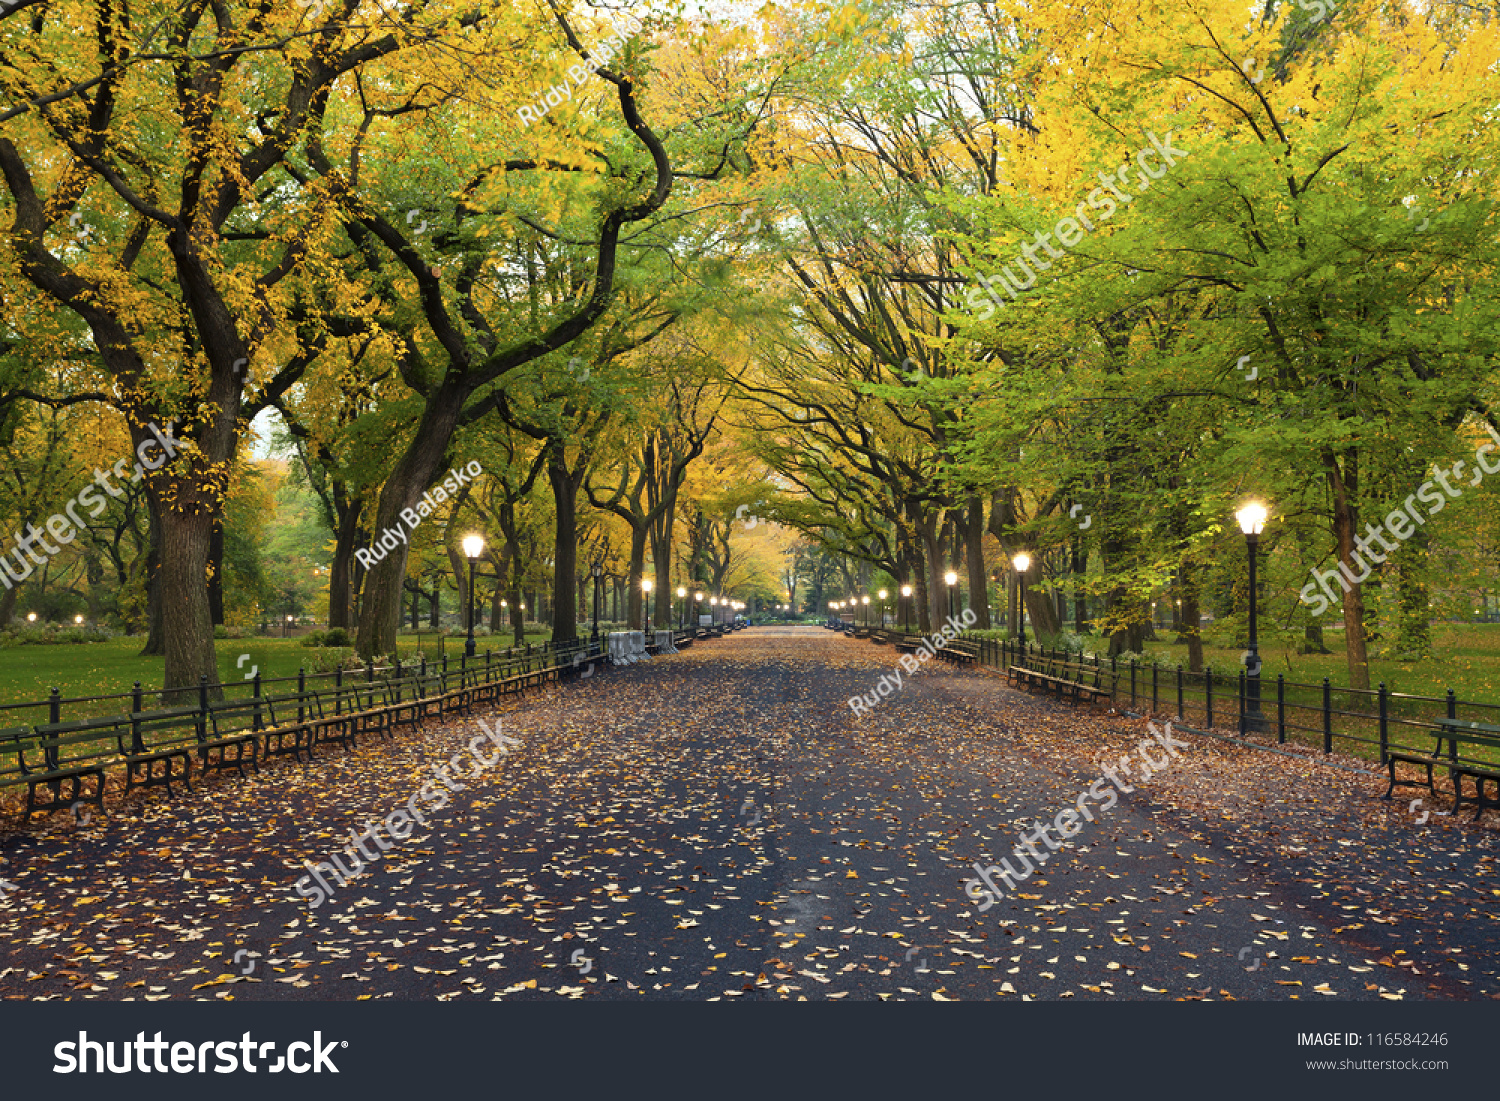 Central Park. Image of  The Mall area in Central Park, New York City, USA at autumn. #116584246